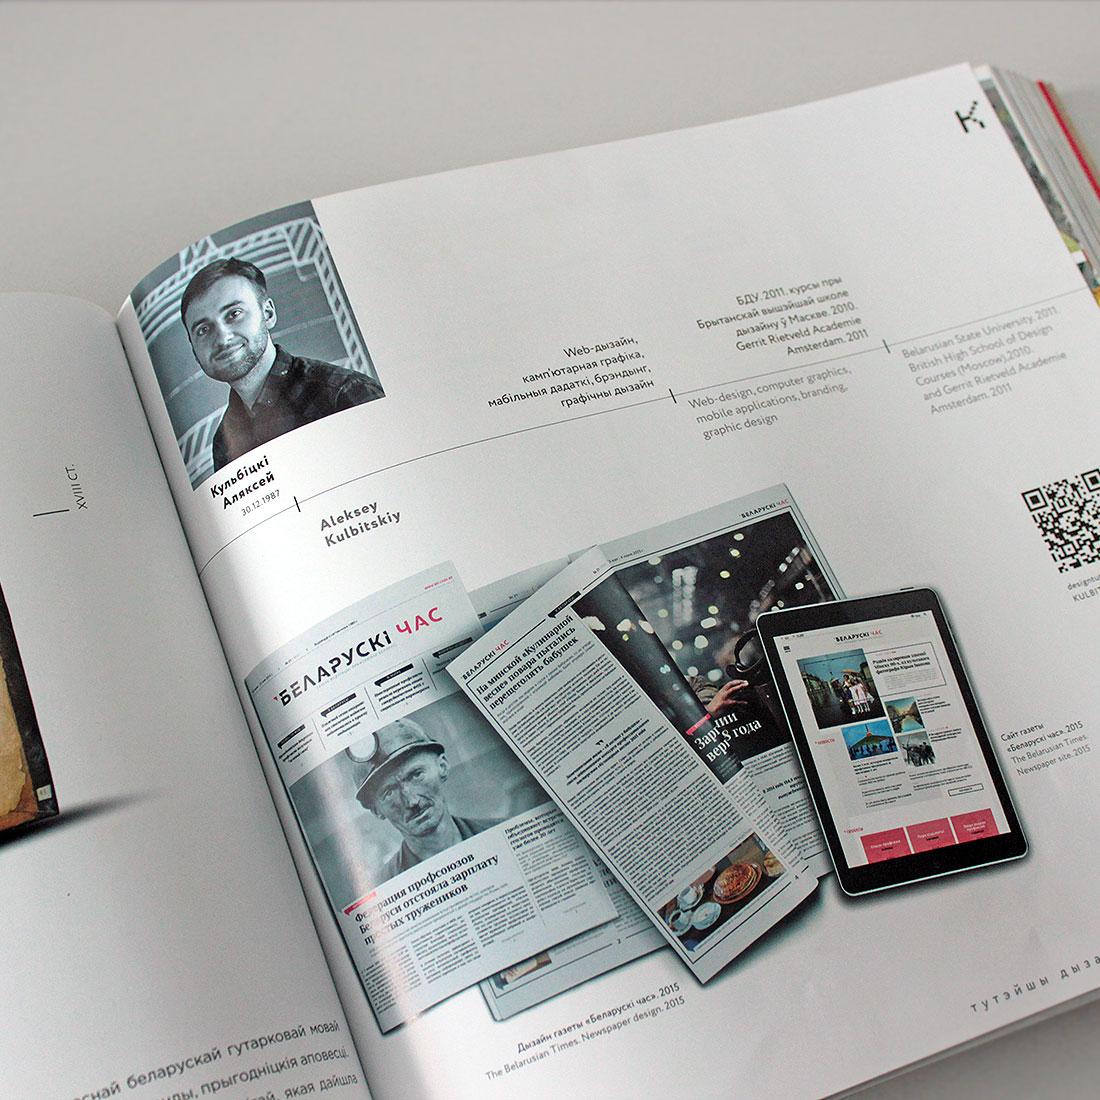 Aliaksej Kulbicki, Art Director of PRAS, on the pages of the catalogue "Local Design. Persons. Things"